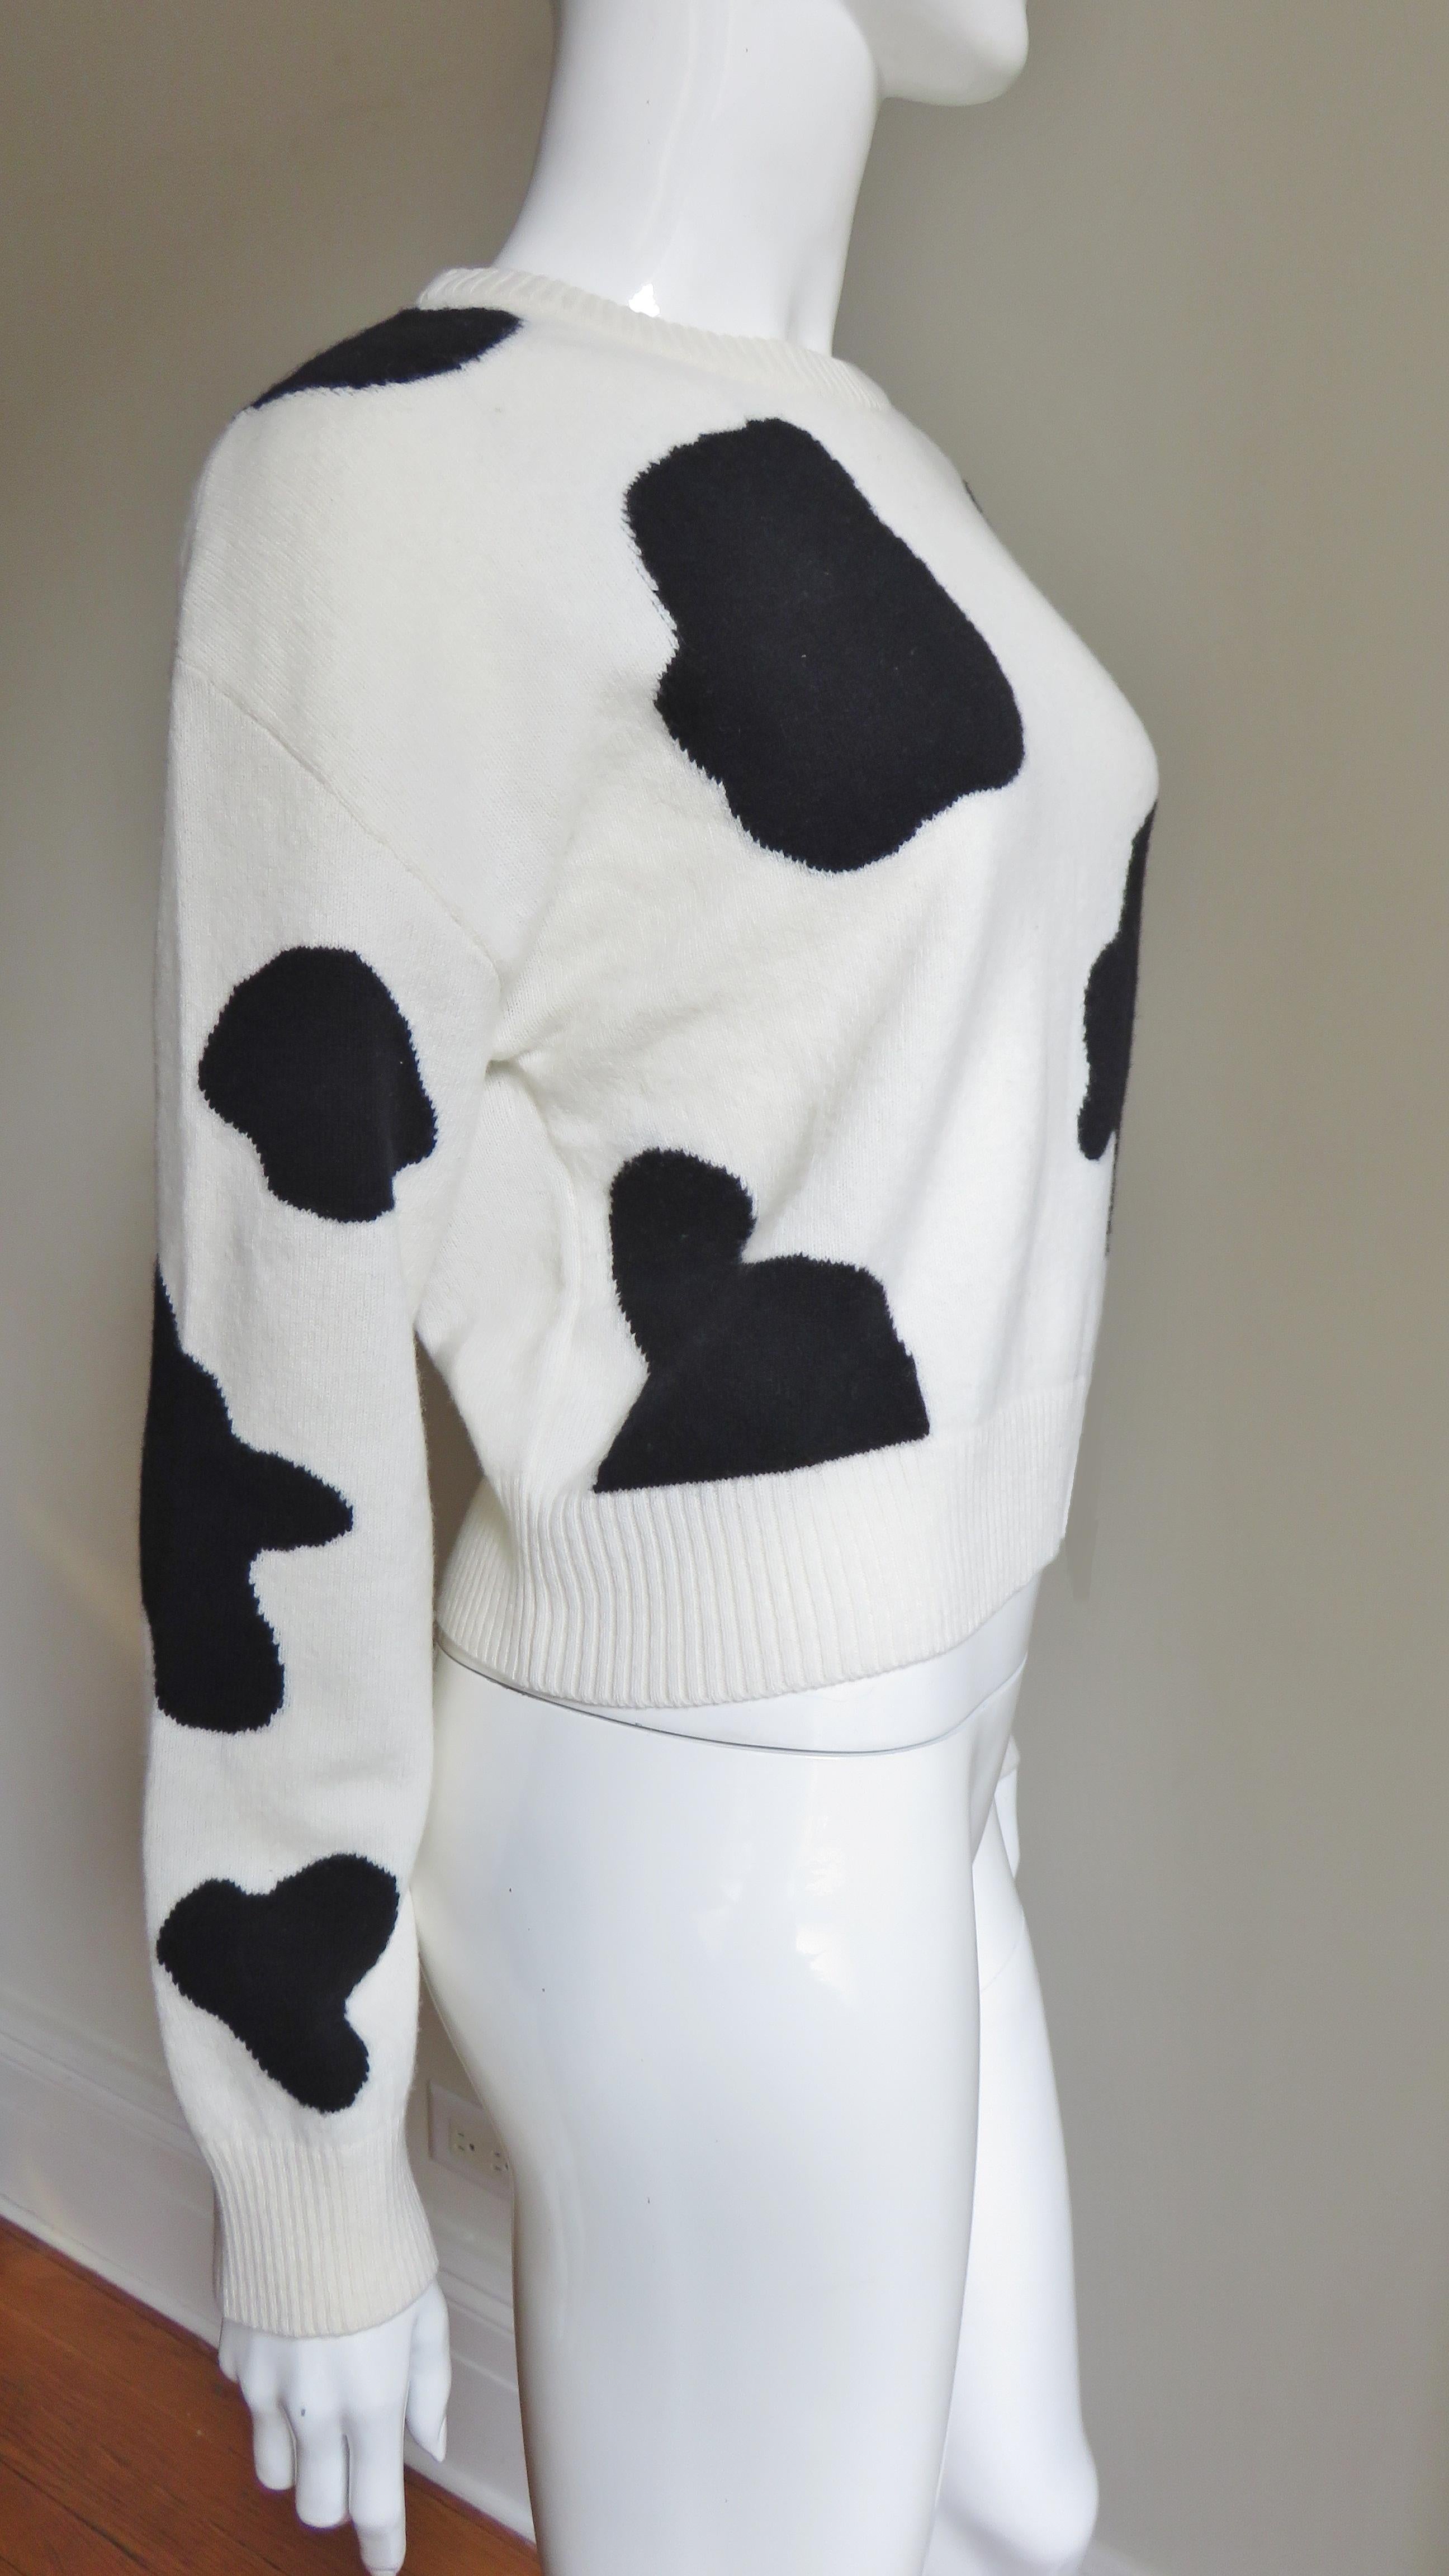 Moschino Couture Cash Cow Appliqued Cashmere Sweater In Good Condition For Sale In Water Mill, NY